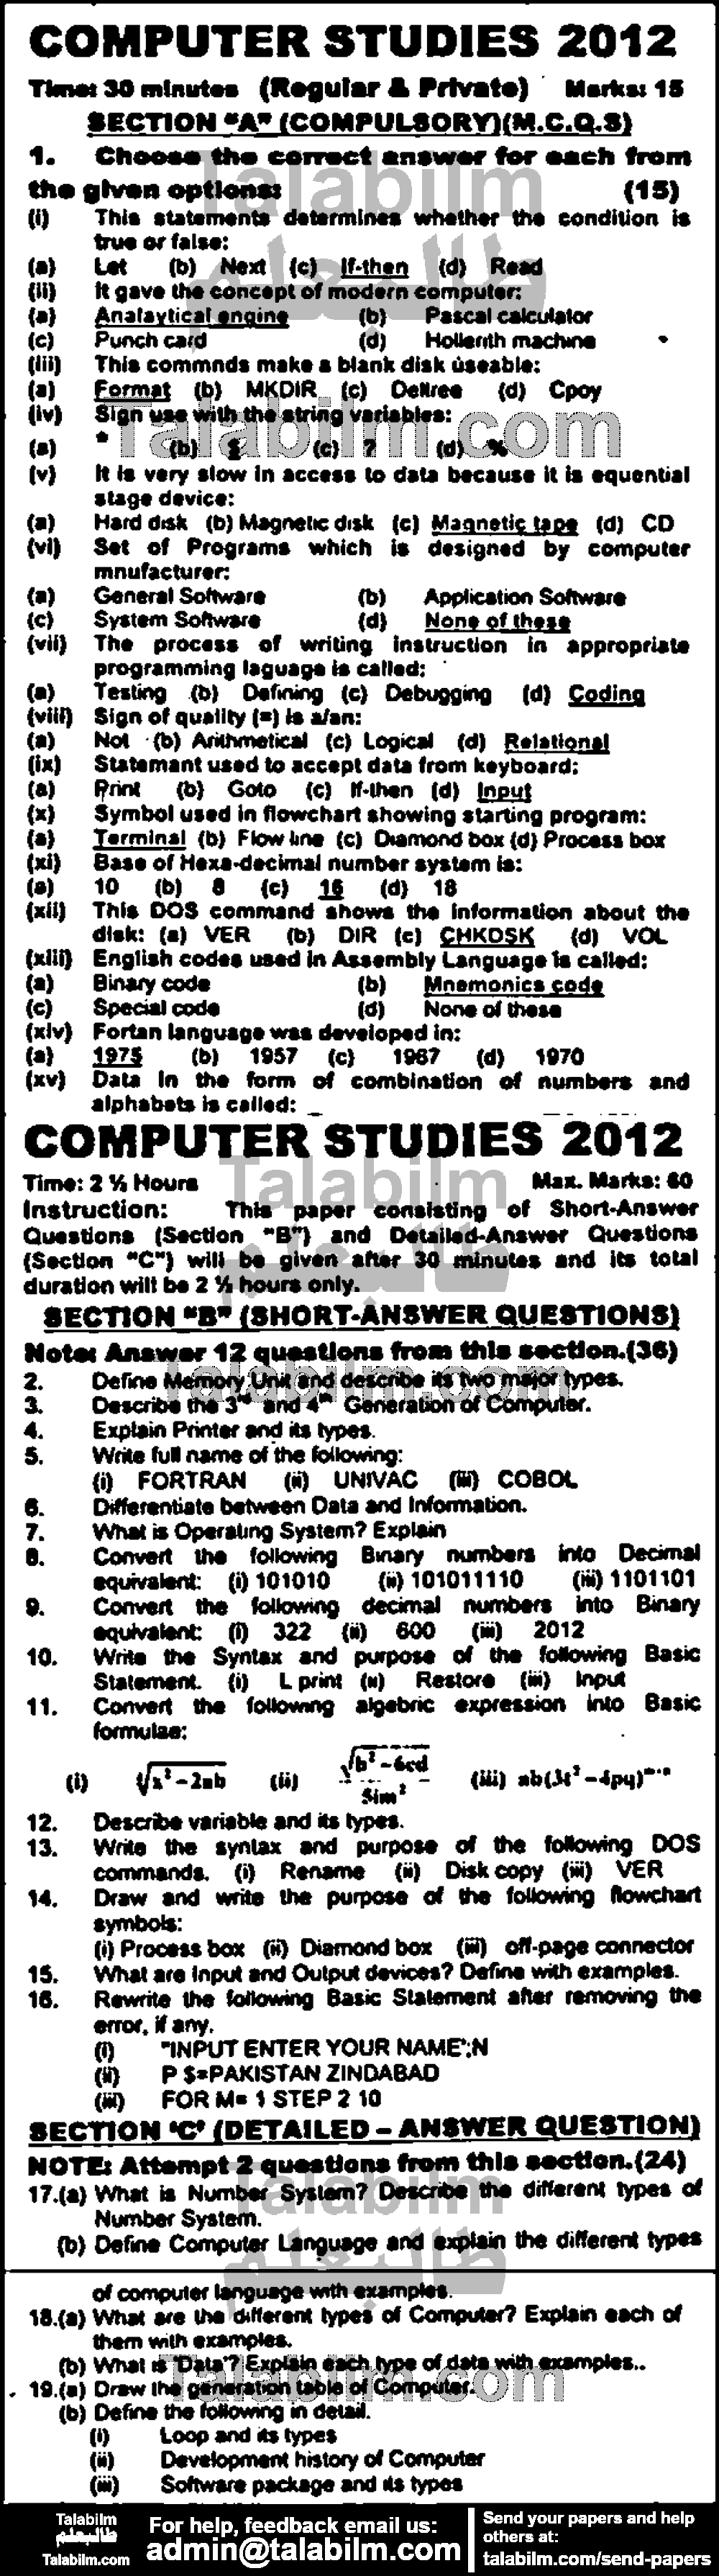 Computer Science 0 past paper for English Medium 2012 Group-I